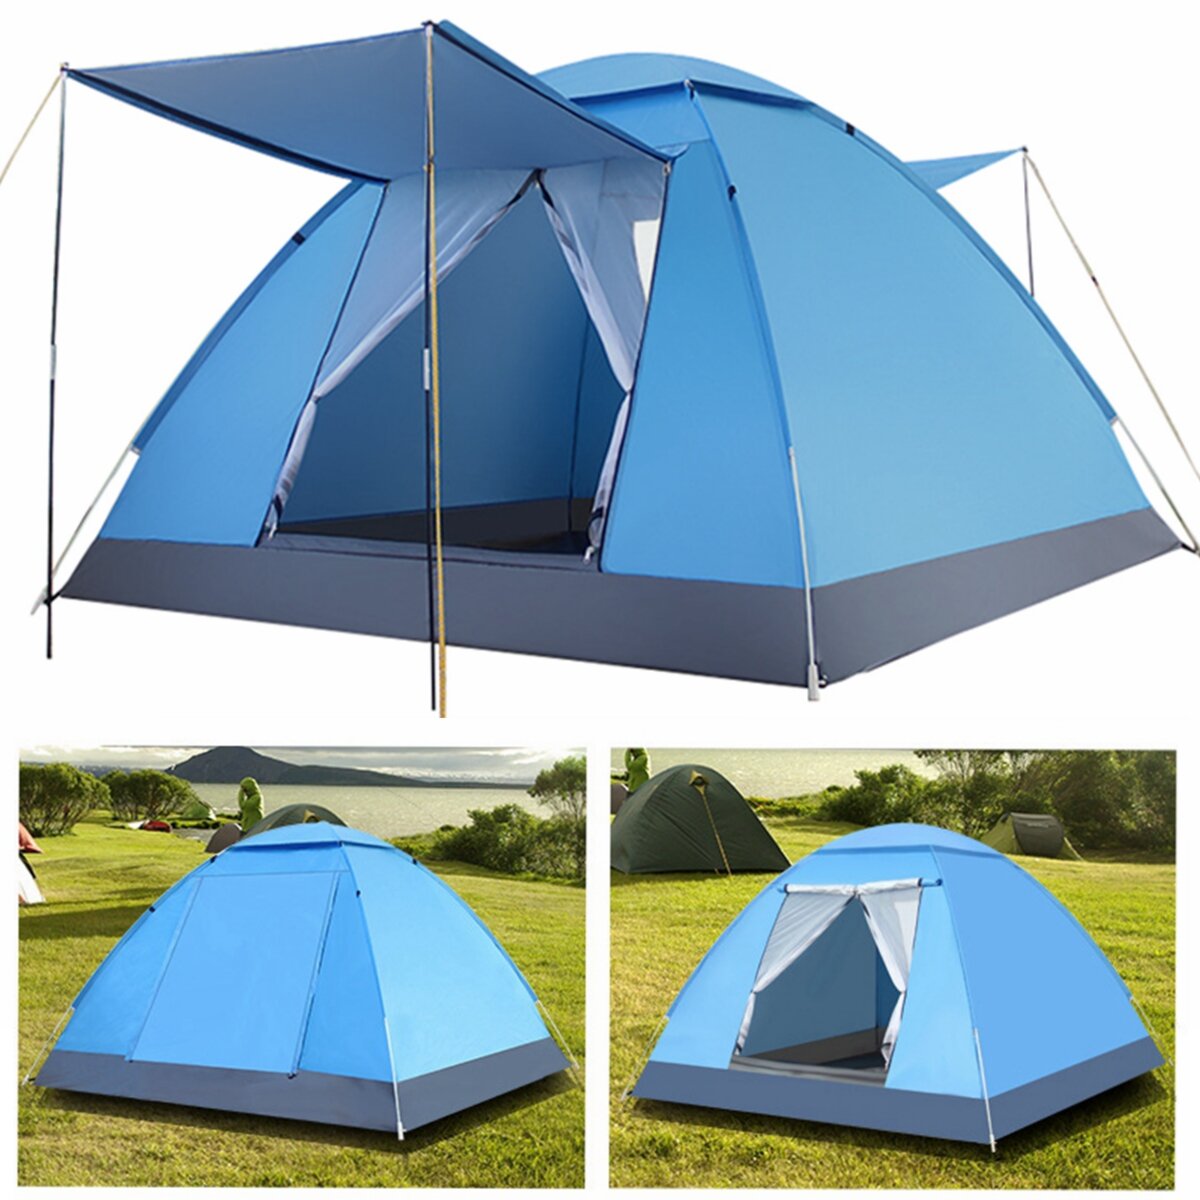 3-4 Person Automatic Camping Tent Portable Waterproof Sunshade Canopy Beach Travel with Moisture-proof Mat